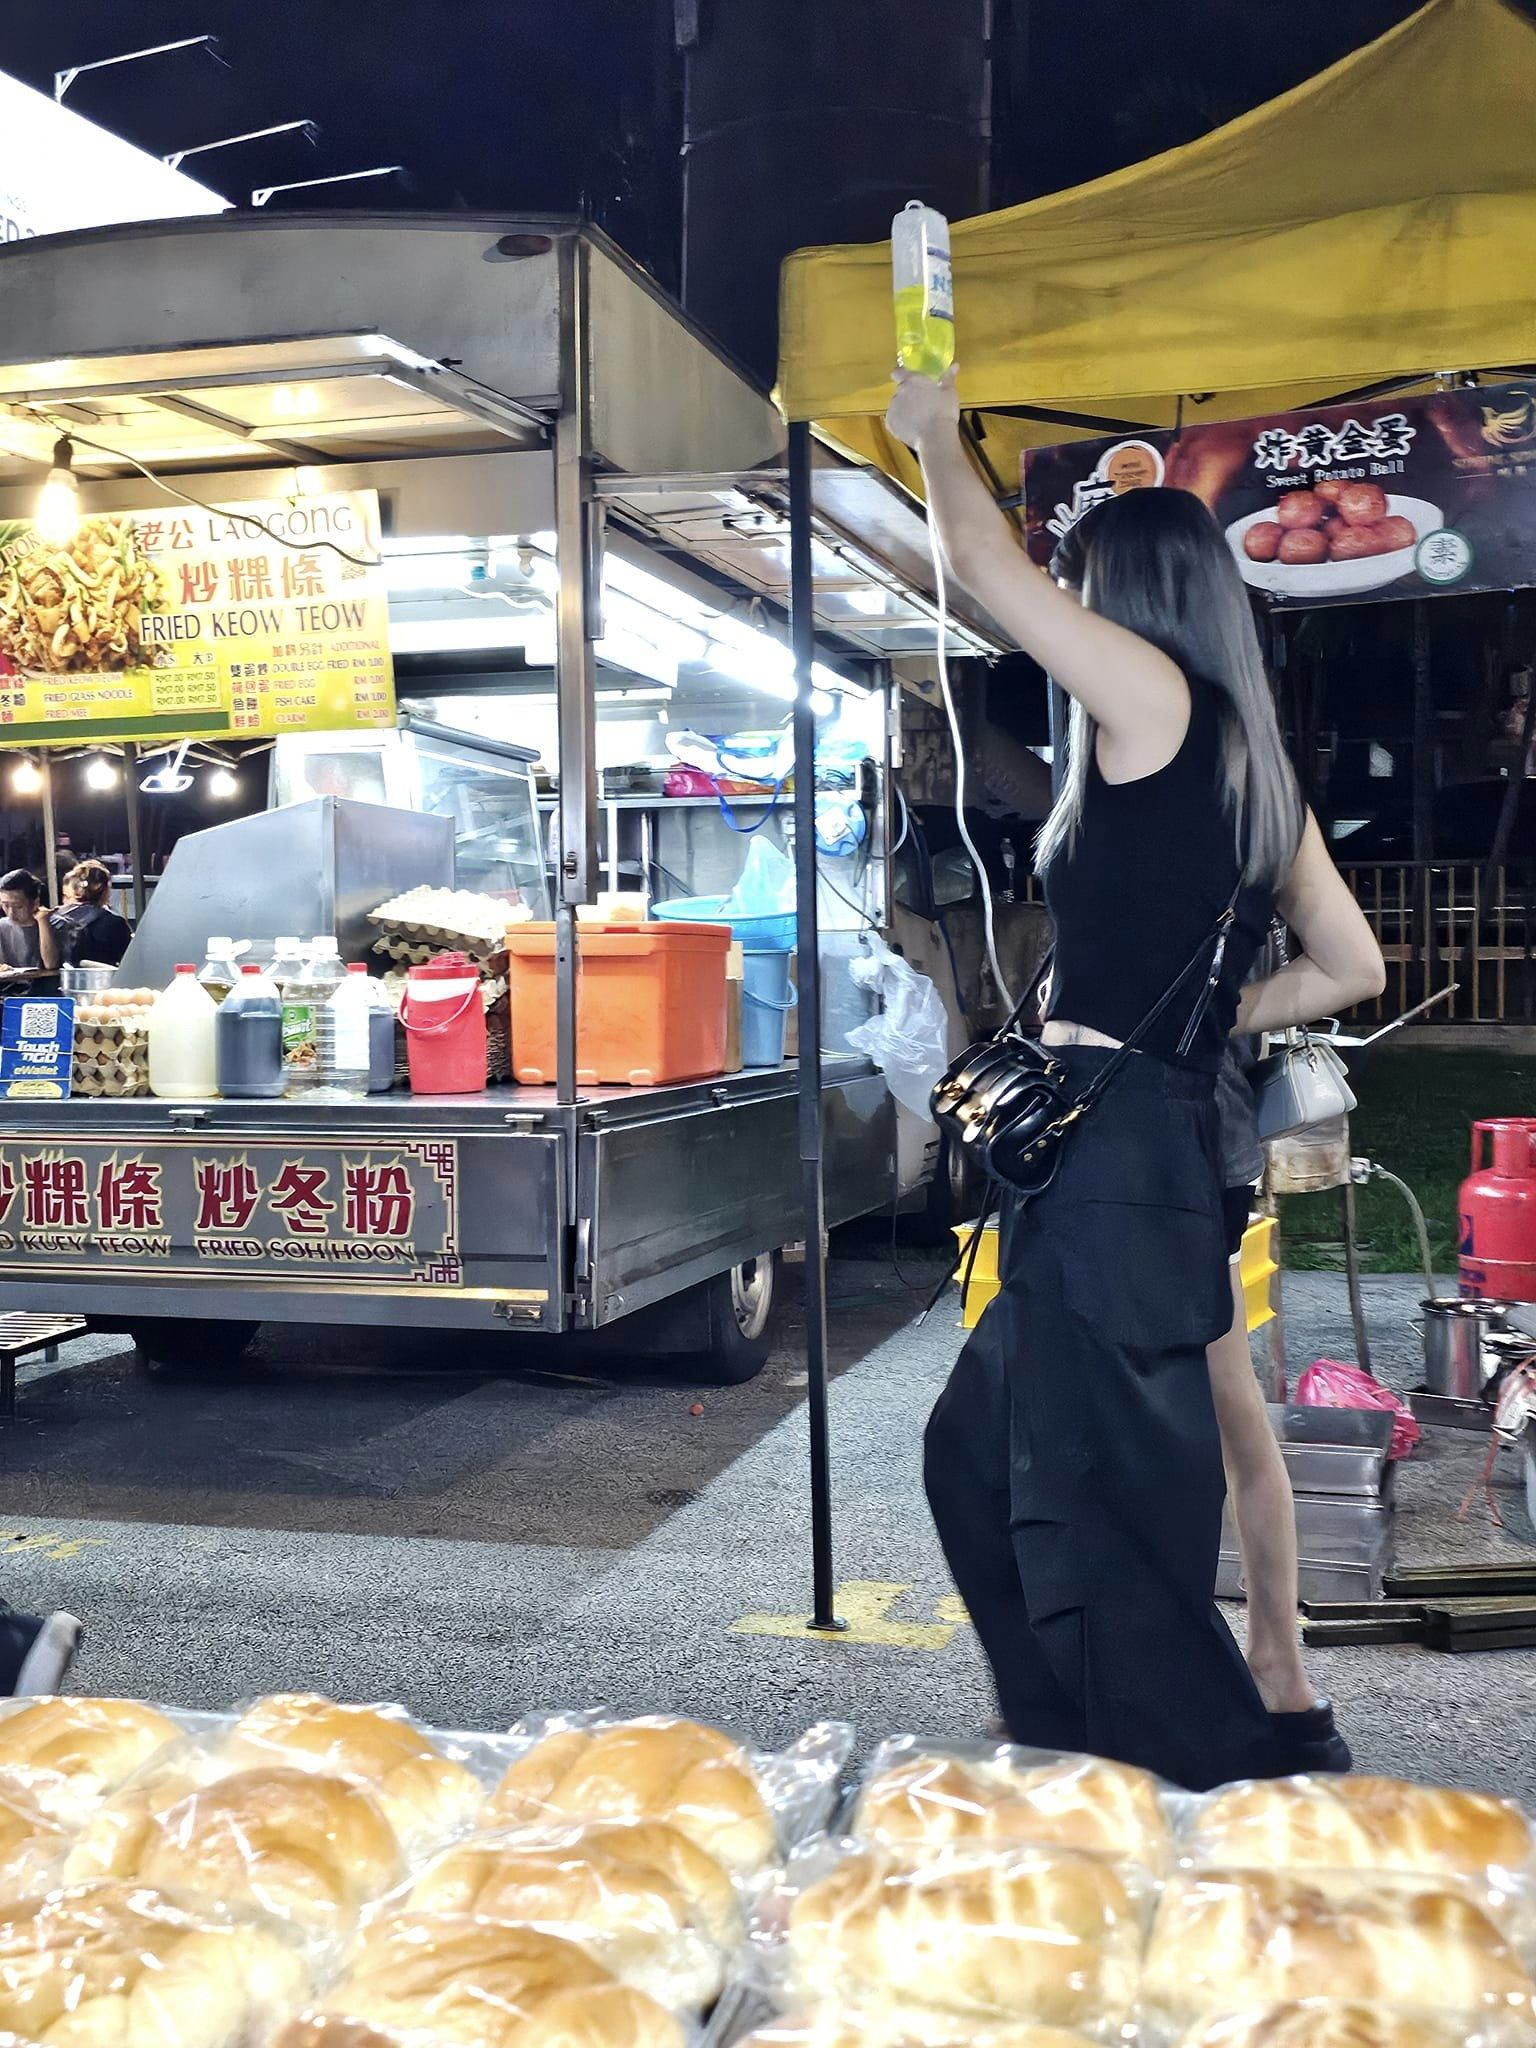 Woman's friend helps her lift iv bag while visiting taman connaught night market